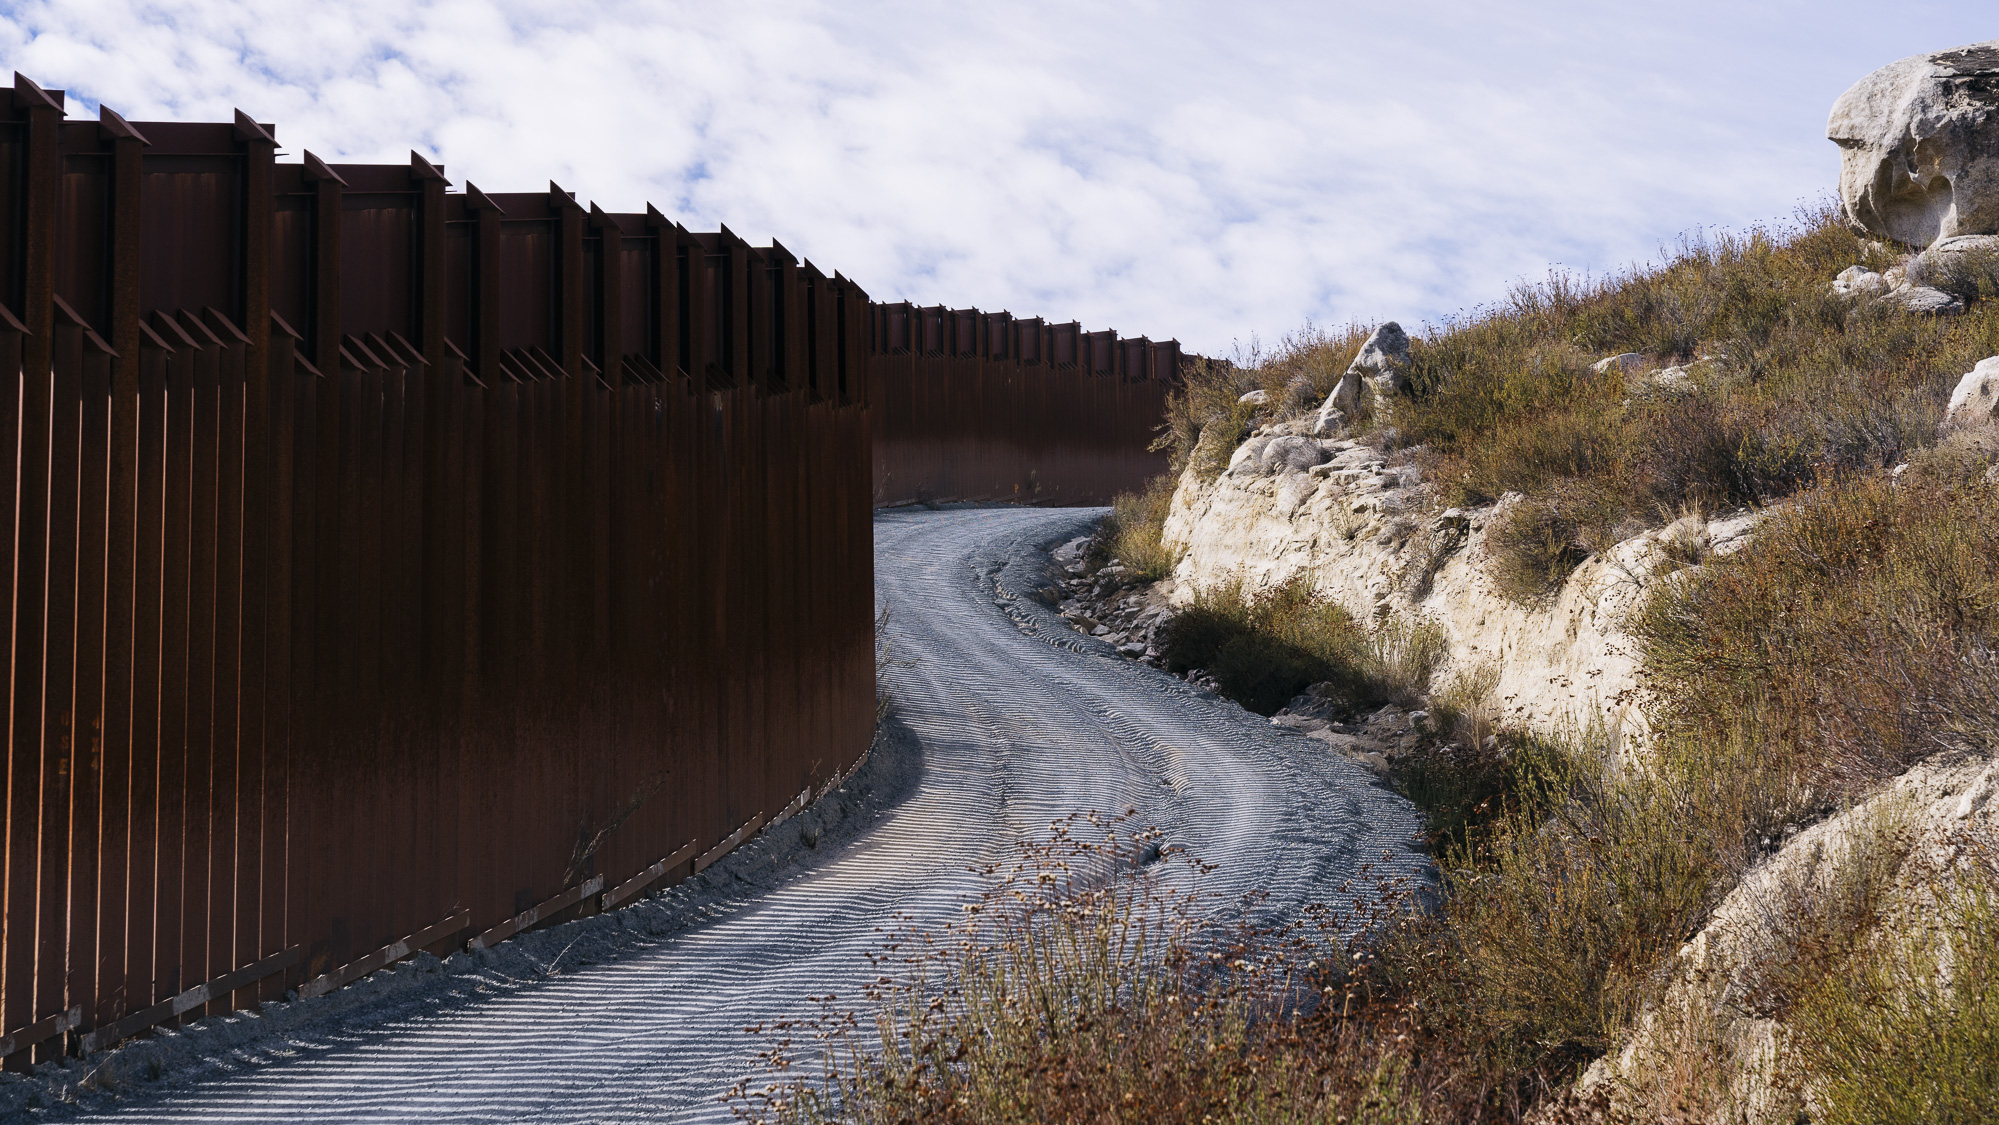   IMAGE CAPTION:   Border fence between the United Mexican States and the United States of America in Campo, California. There are nearly 700 miles of border fence already built along the 1,954 mile border between the two countries. 